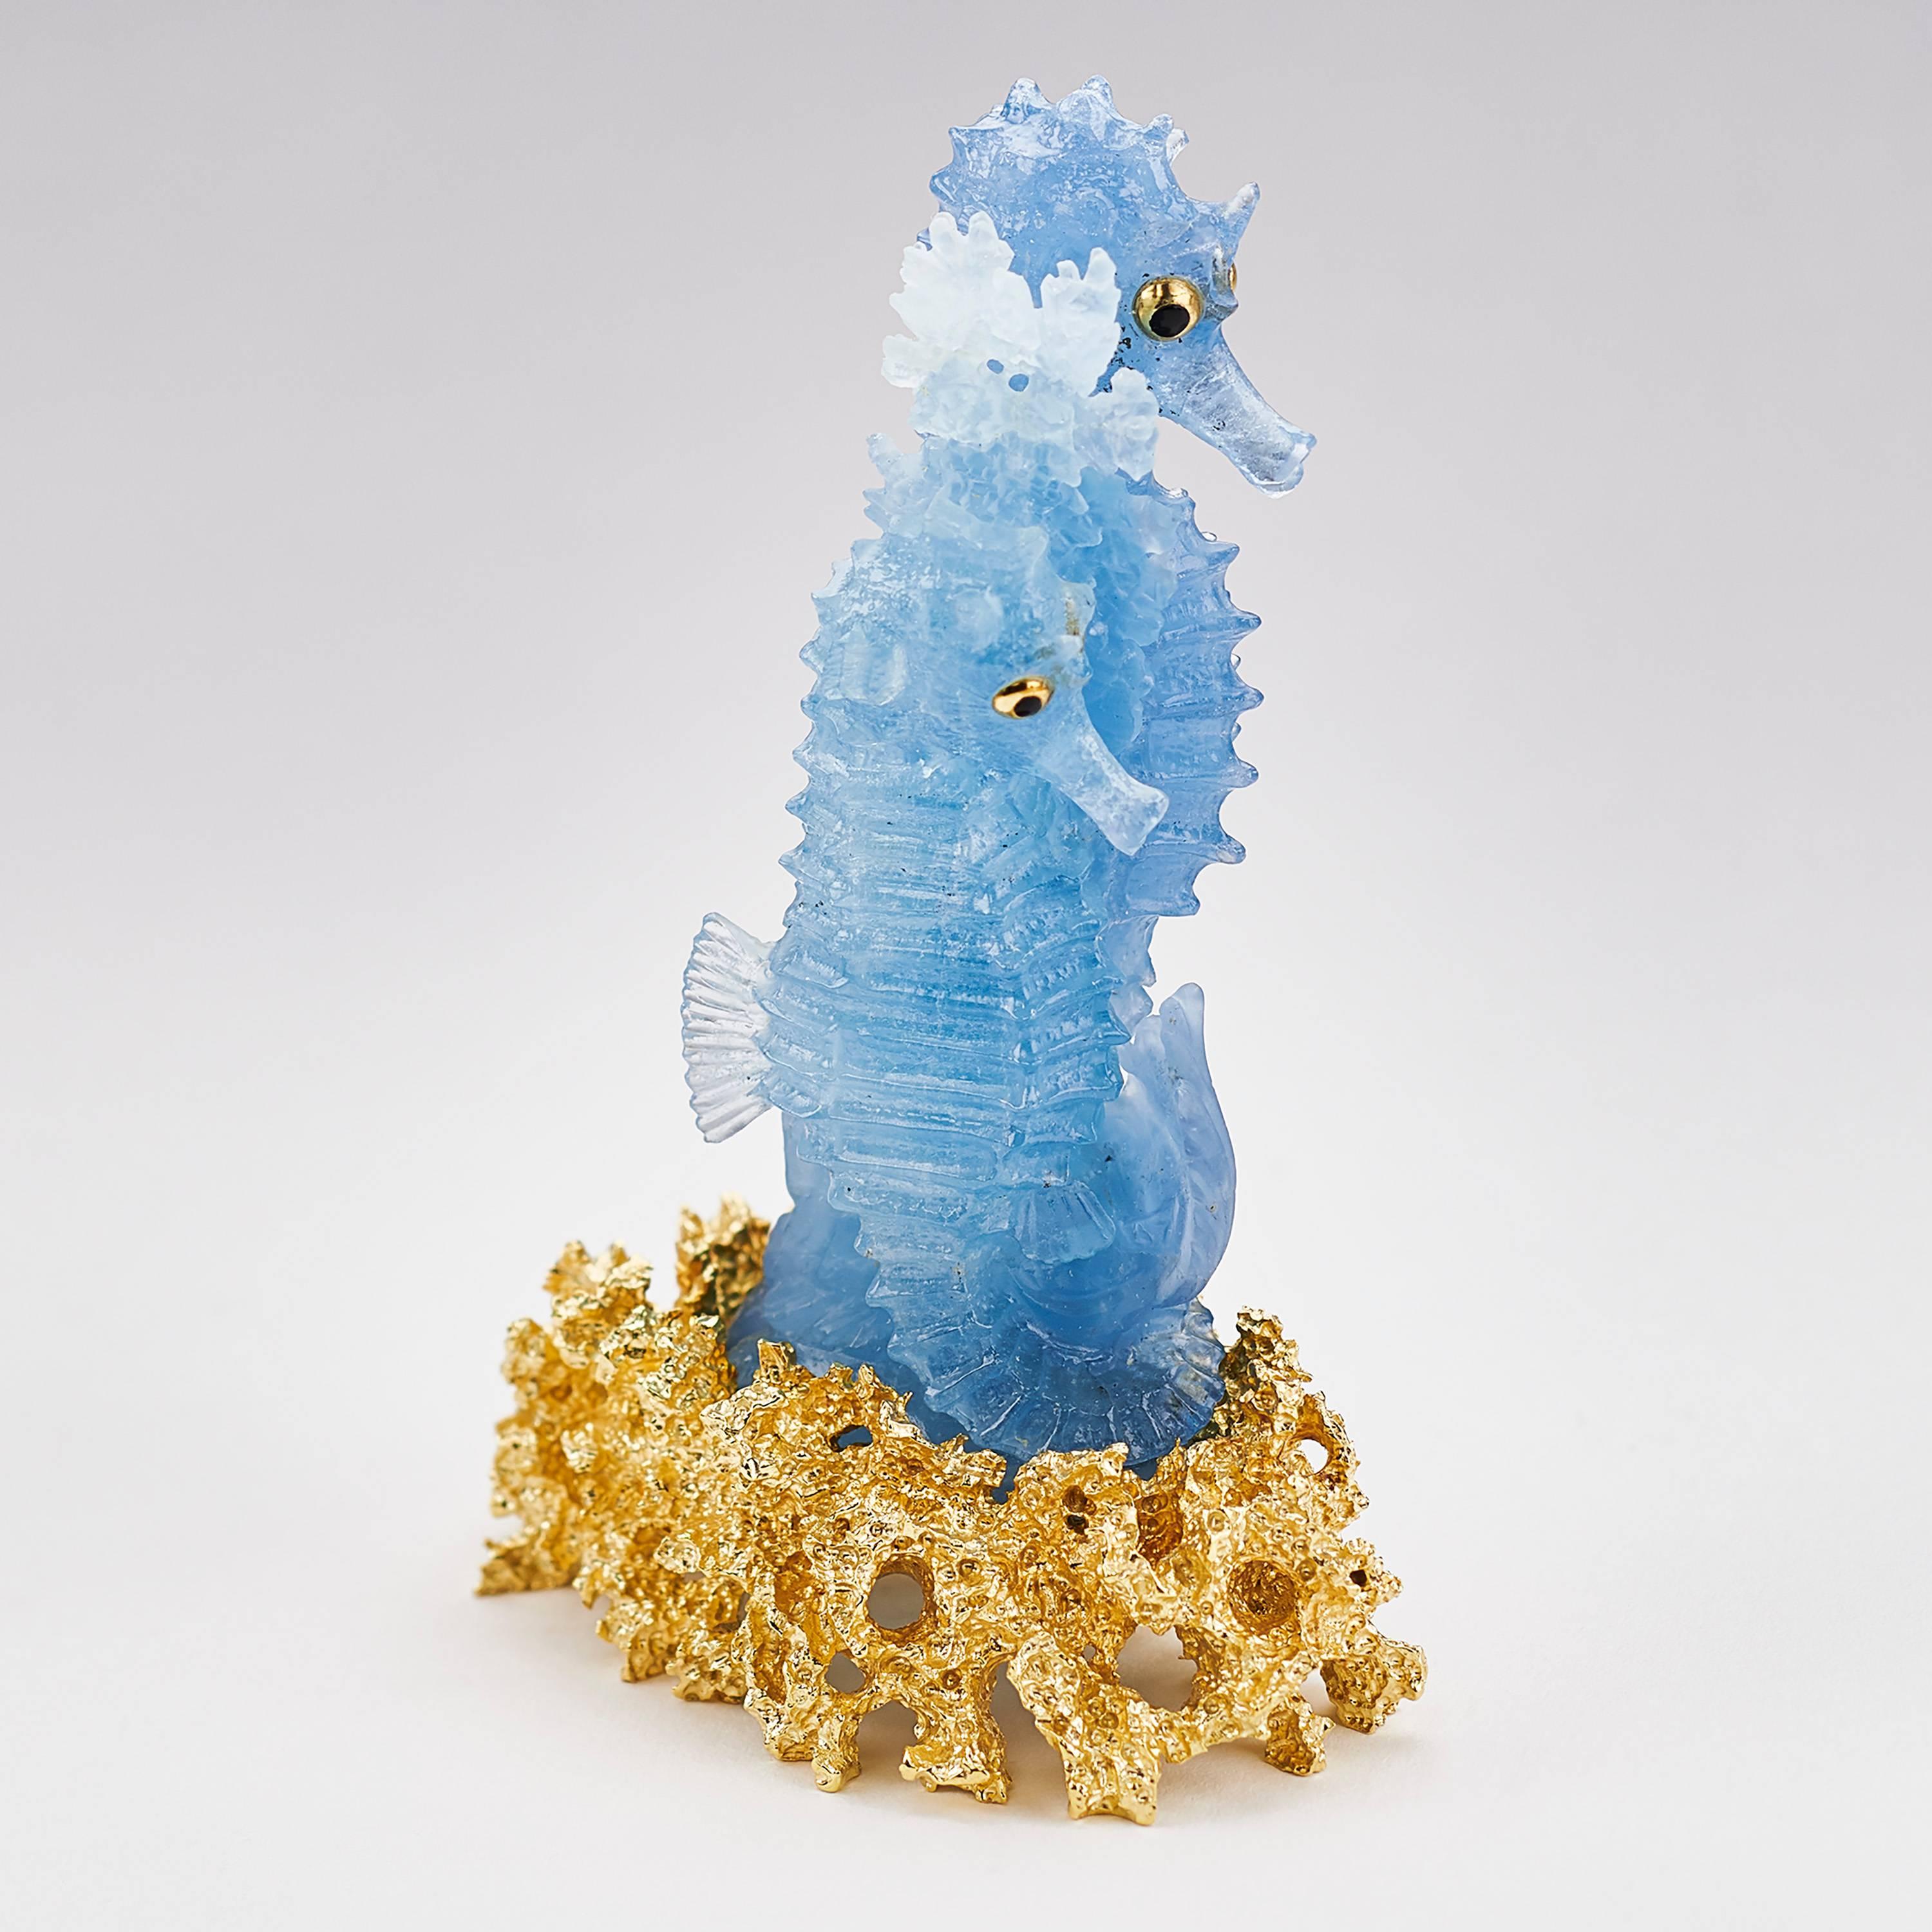 A lovely pair of seahorses designed by Henn.
The seahorses are carved out of one natural aquamarine crystal with 2 color shades by gemstone master carver Michael Peuster.
The eyes are blue sapphire cabs, set in 18ct yellow gold. The base is made out